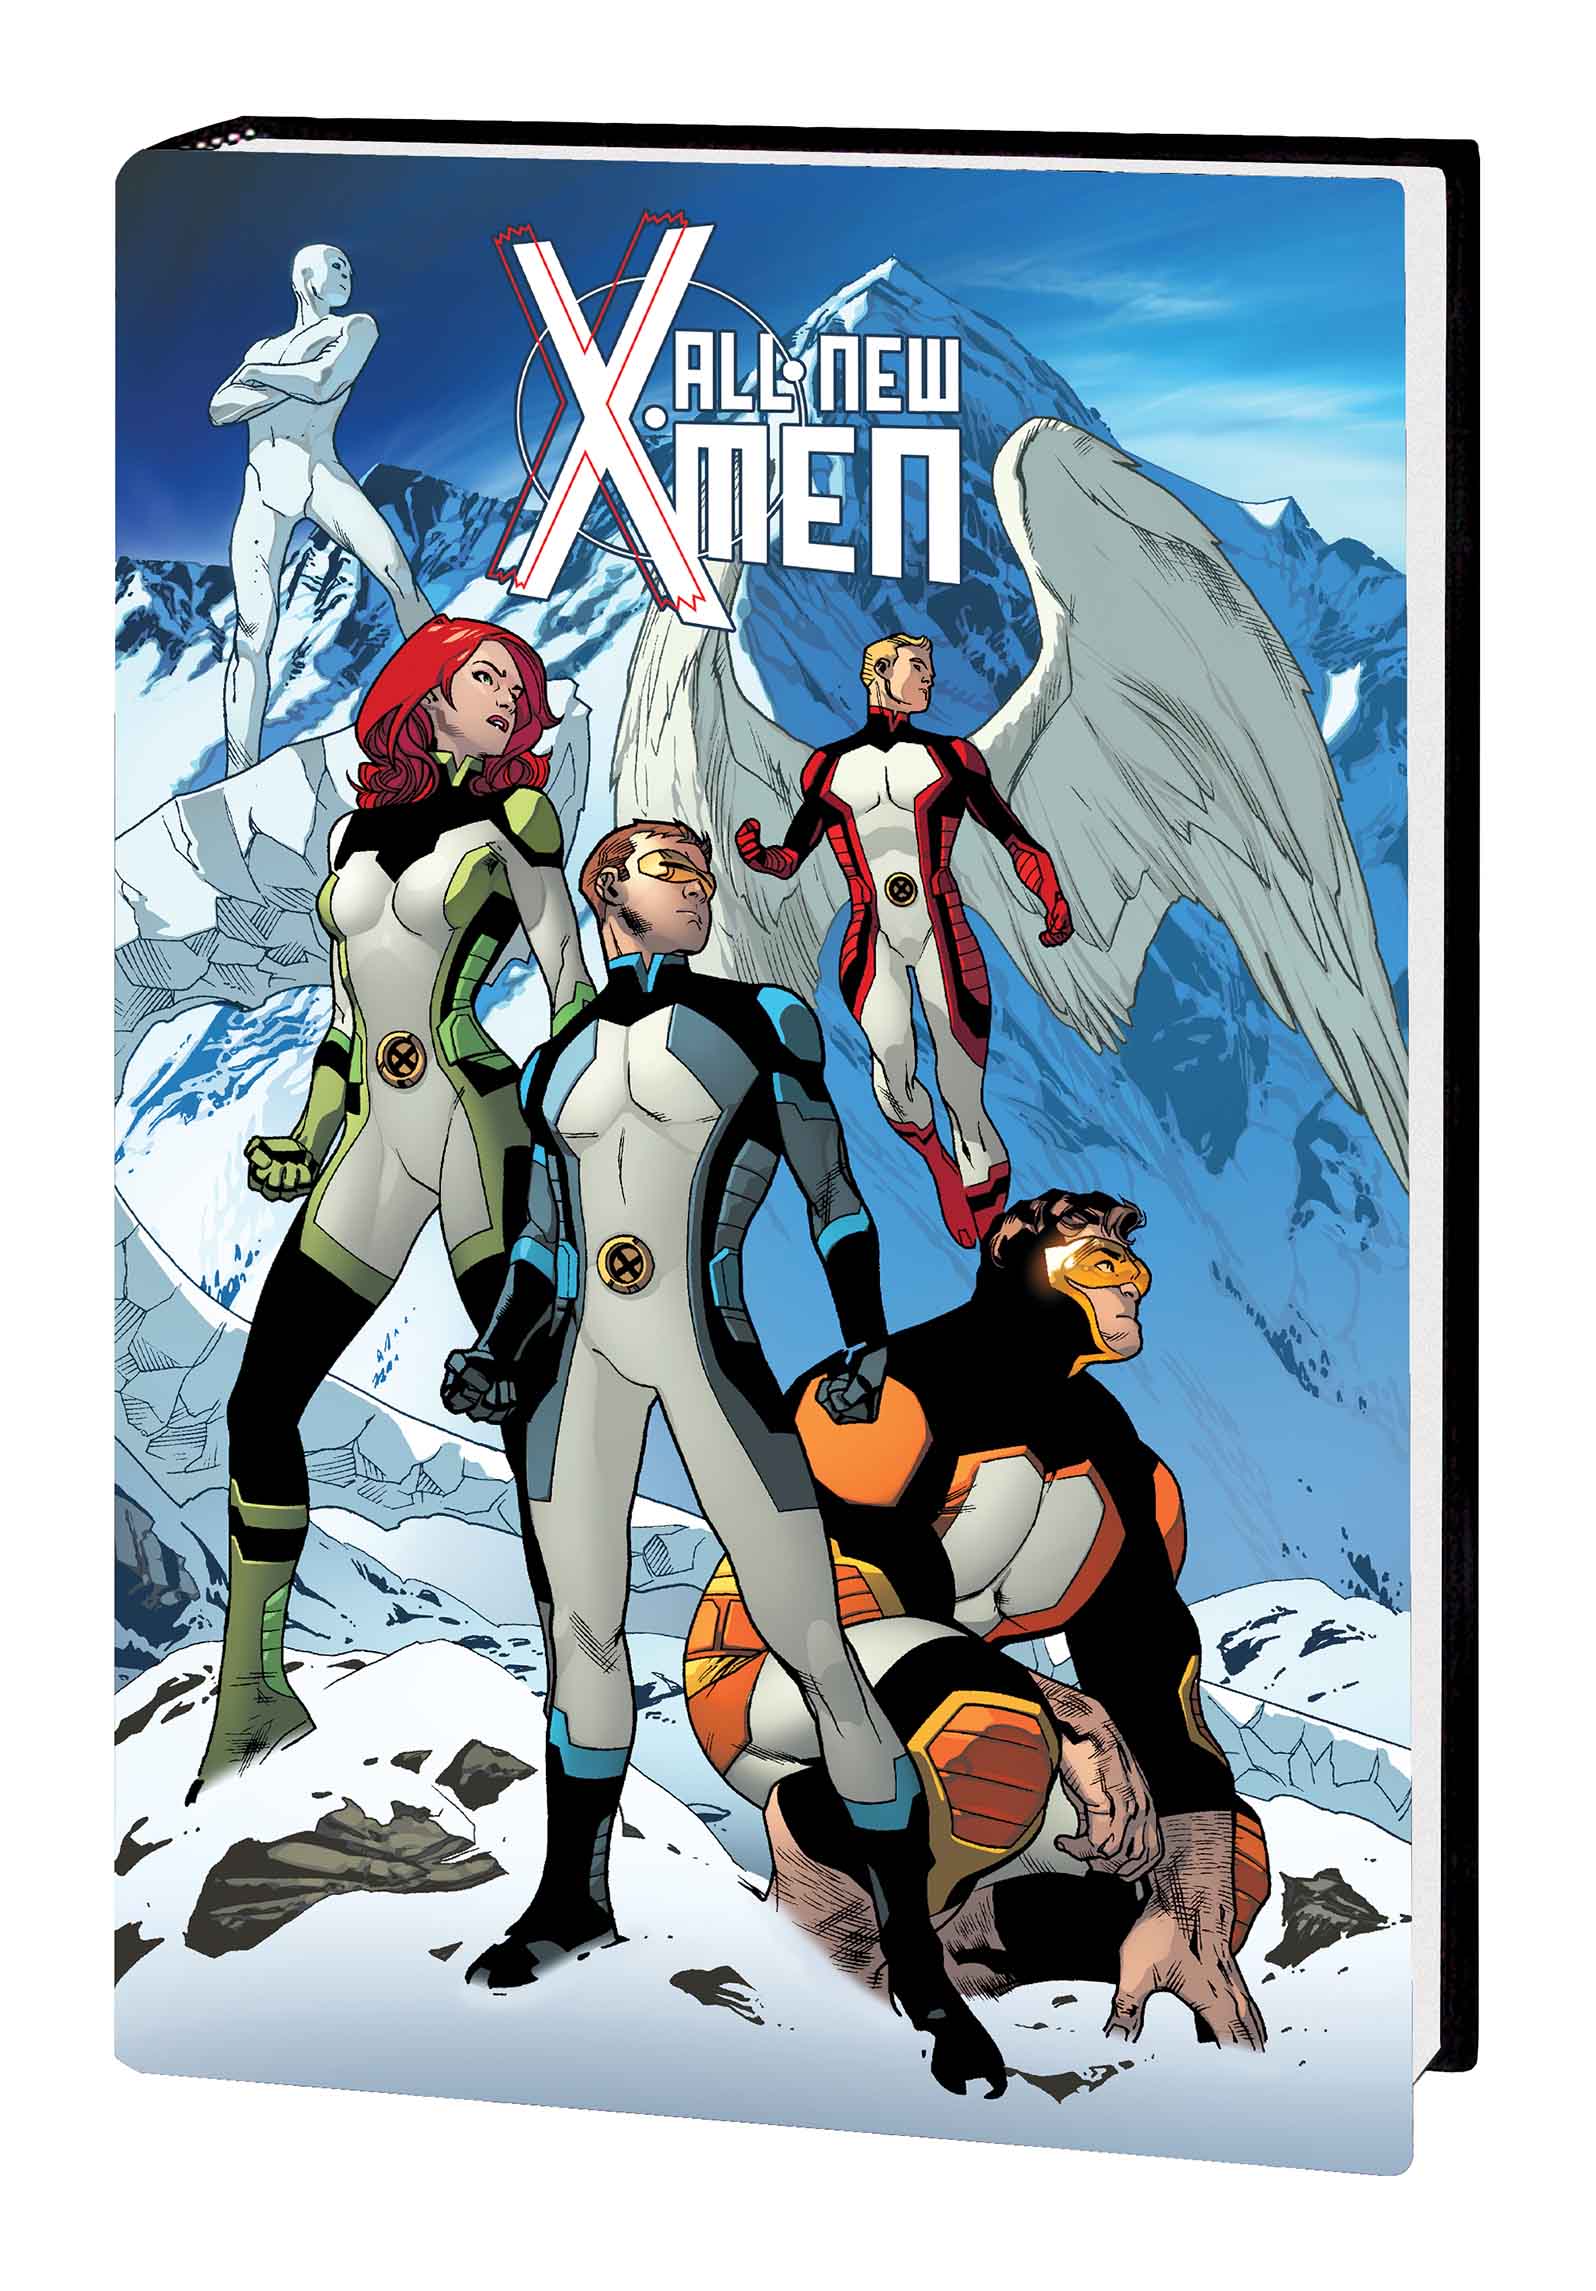 ALL-NEW X-MEN VOL. 4: ALL-DIFFERENT PREMIERE HC (Trade Paperback)